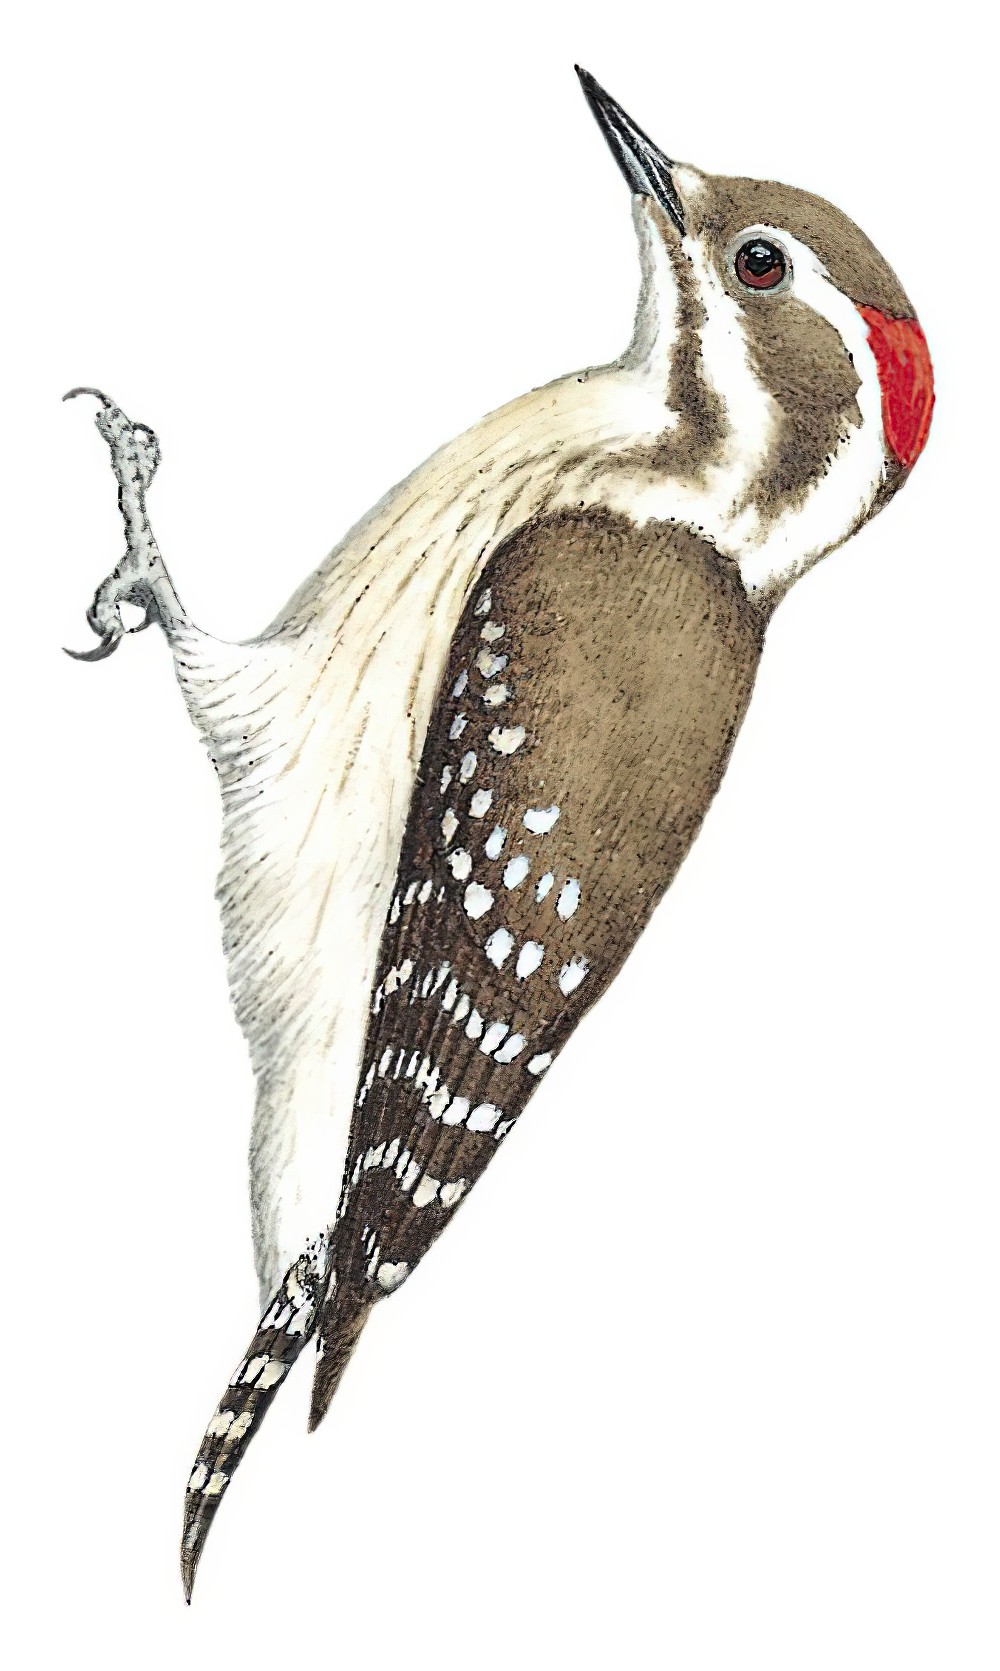 Brown-backed Woodpecker / Chloropicus obsoletus